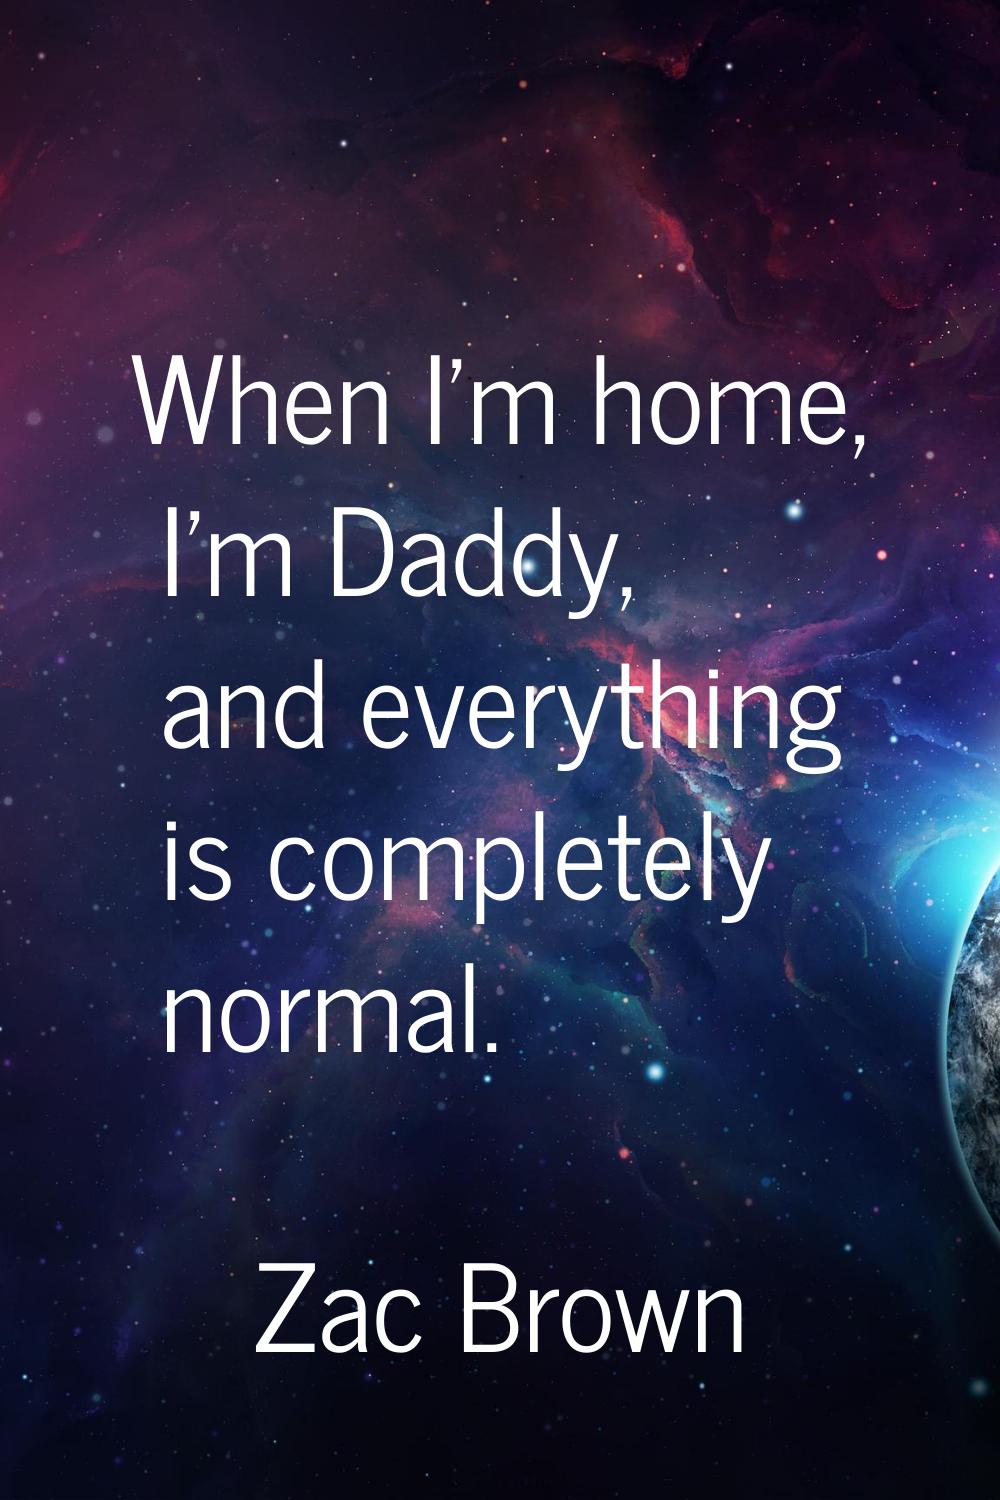 When I'm home, I'm Daddy, and everything is completely normal.